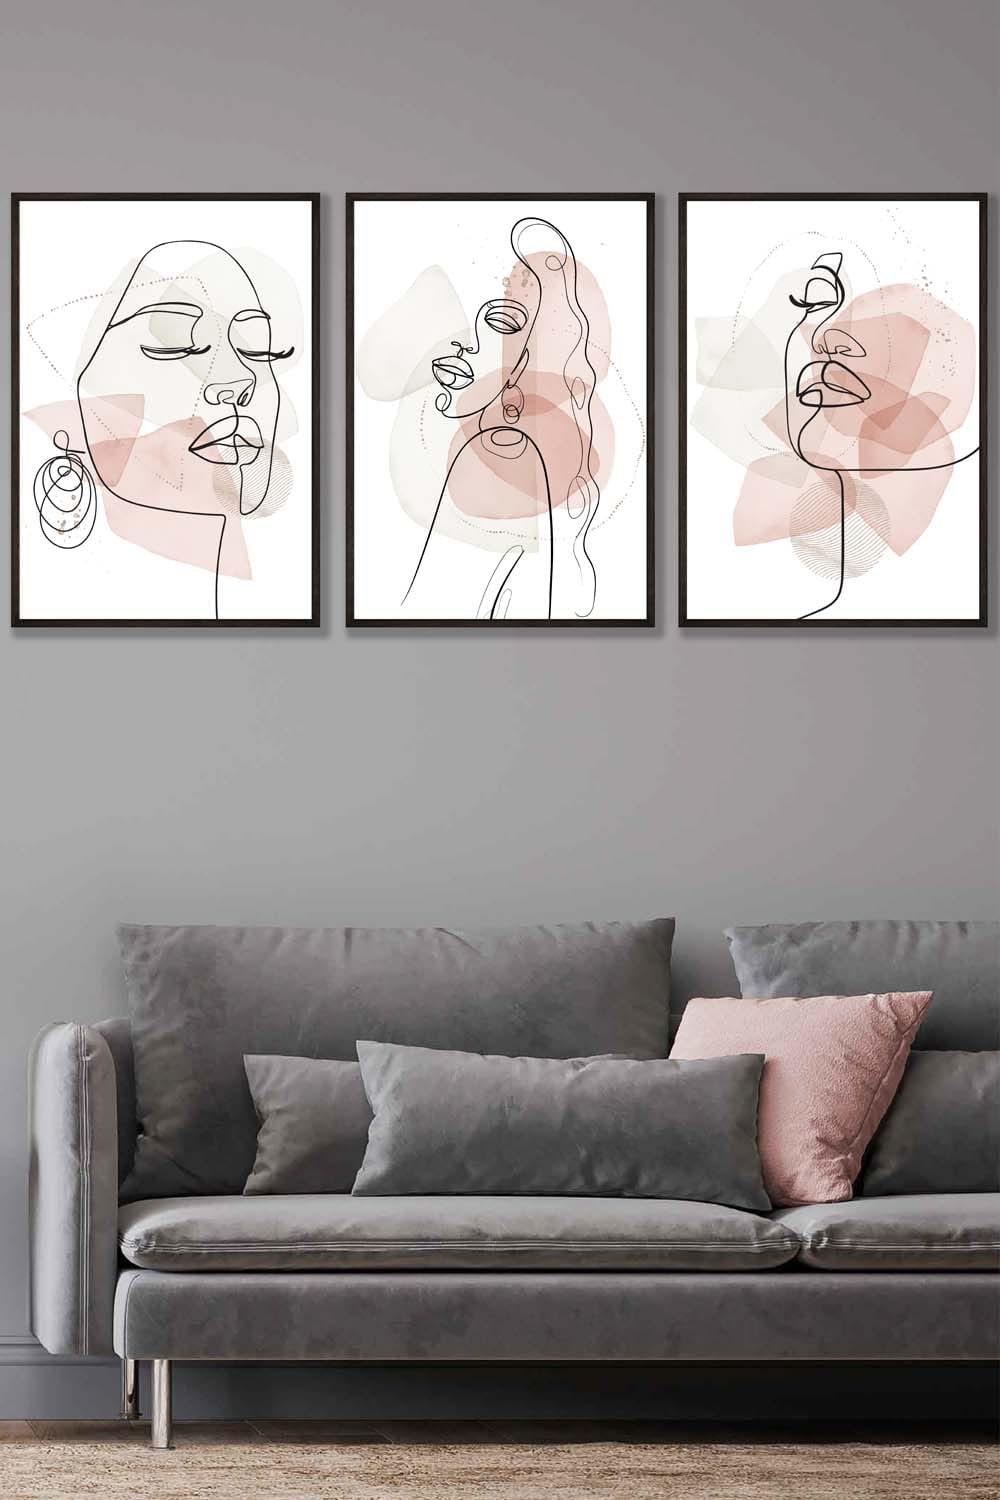 Set of 3 Black Framed One Line Abstract Fashion Faces in Pink and Ivory Wall Art